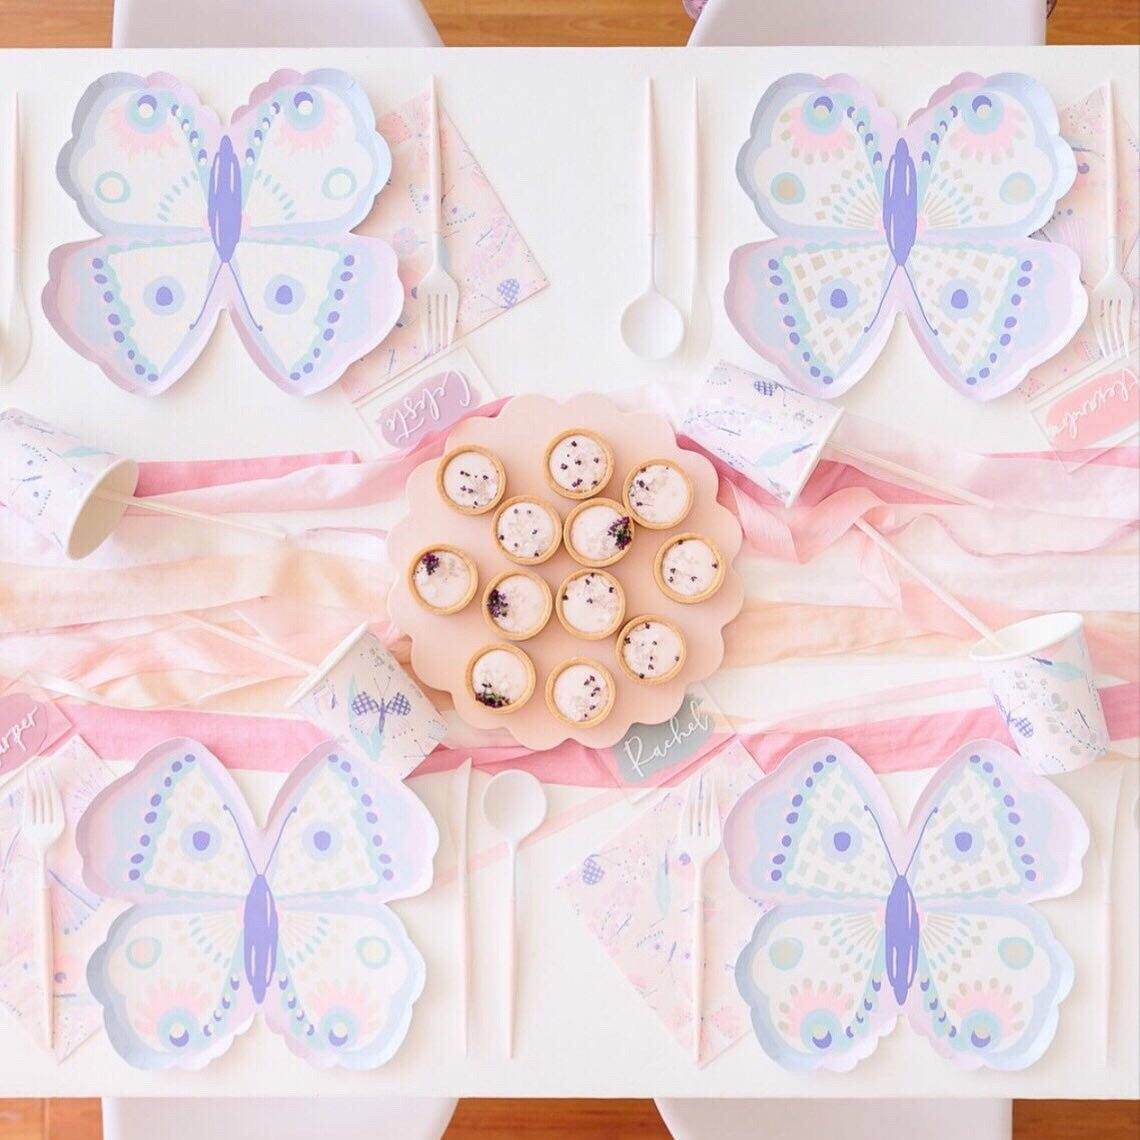 CUPS - DAYDREAM SOCIETY FLUTTER BUTTERFLY, Cups, Daydream Society - Bon + Co. Party Studio